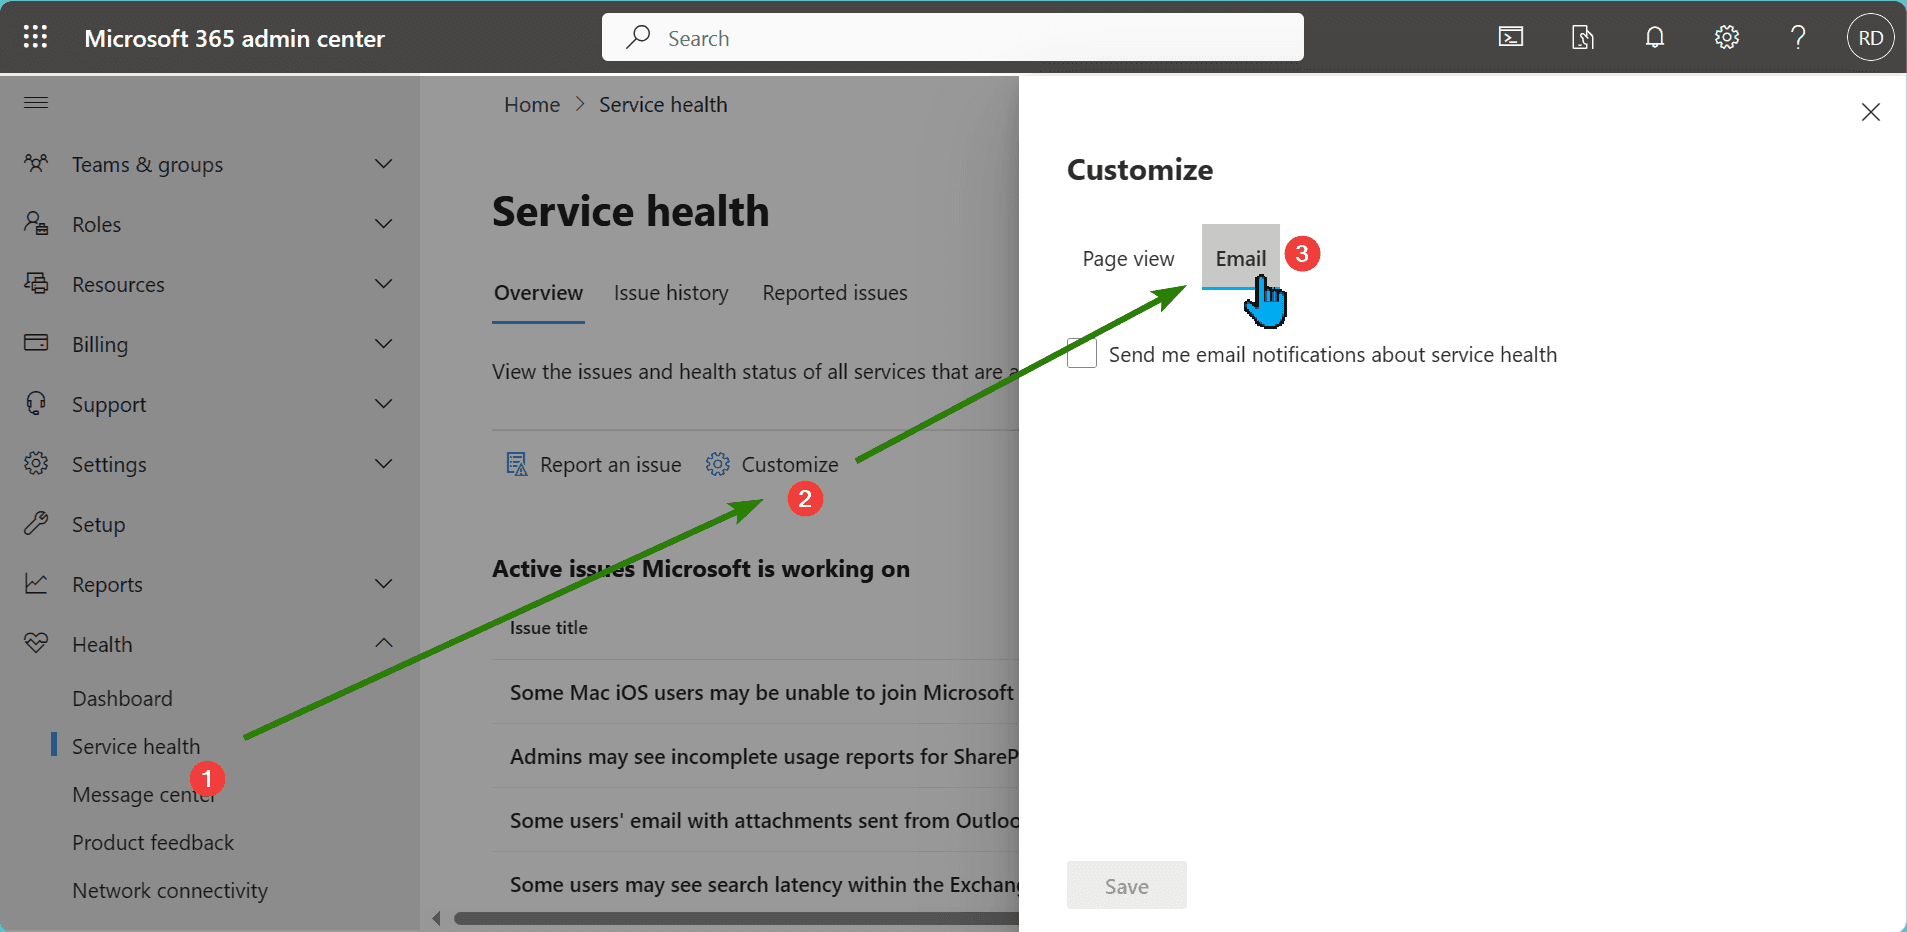 Opening Email settings of the Service Health